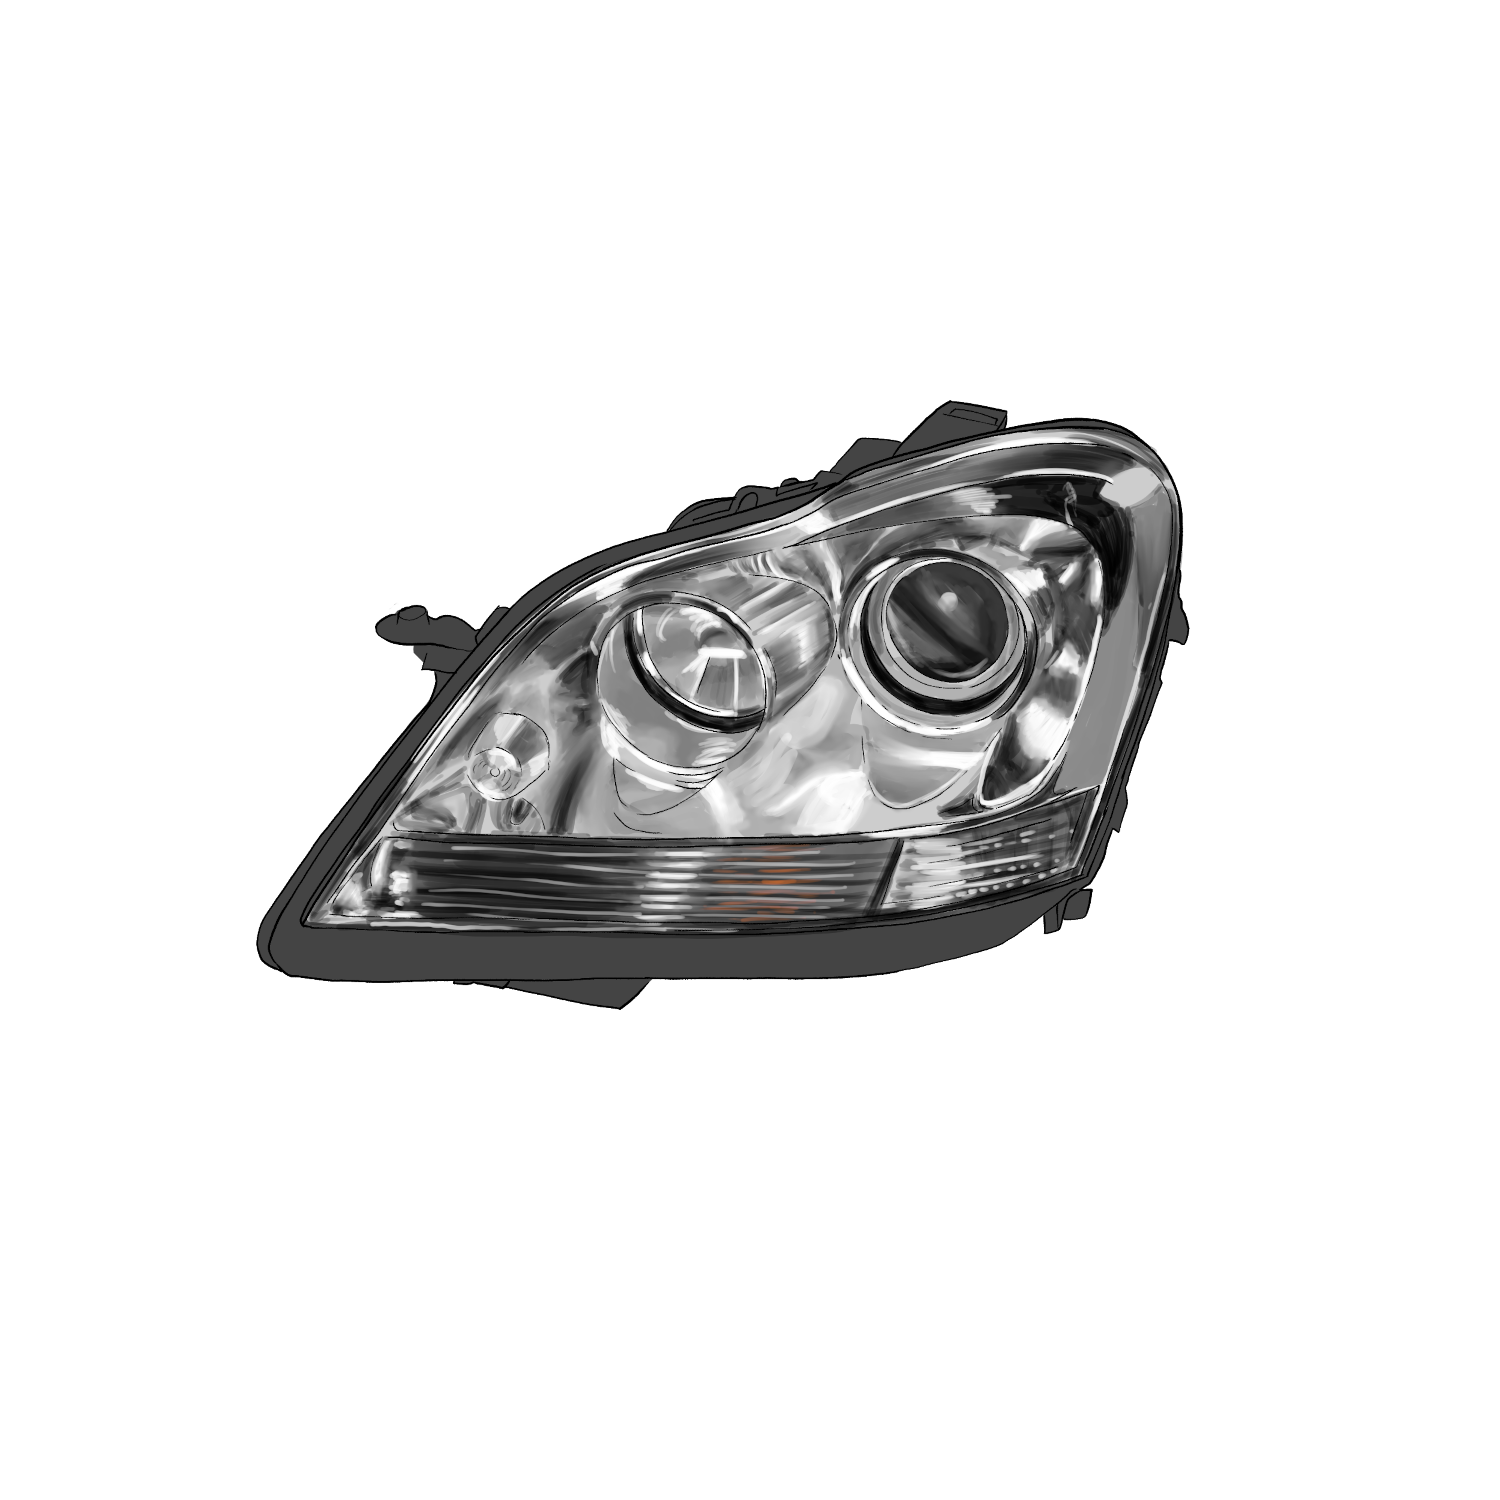  Product image 1 of the product “Headlight OX5 ”